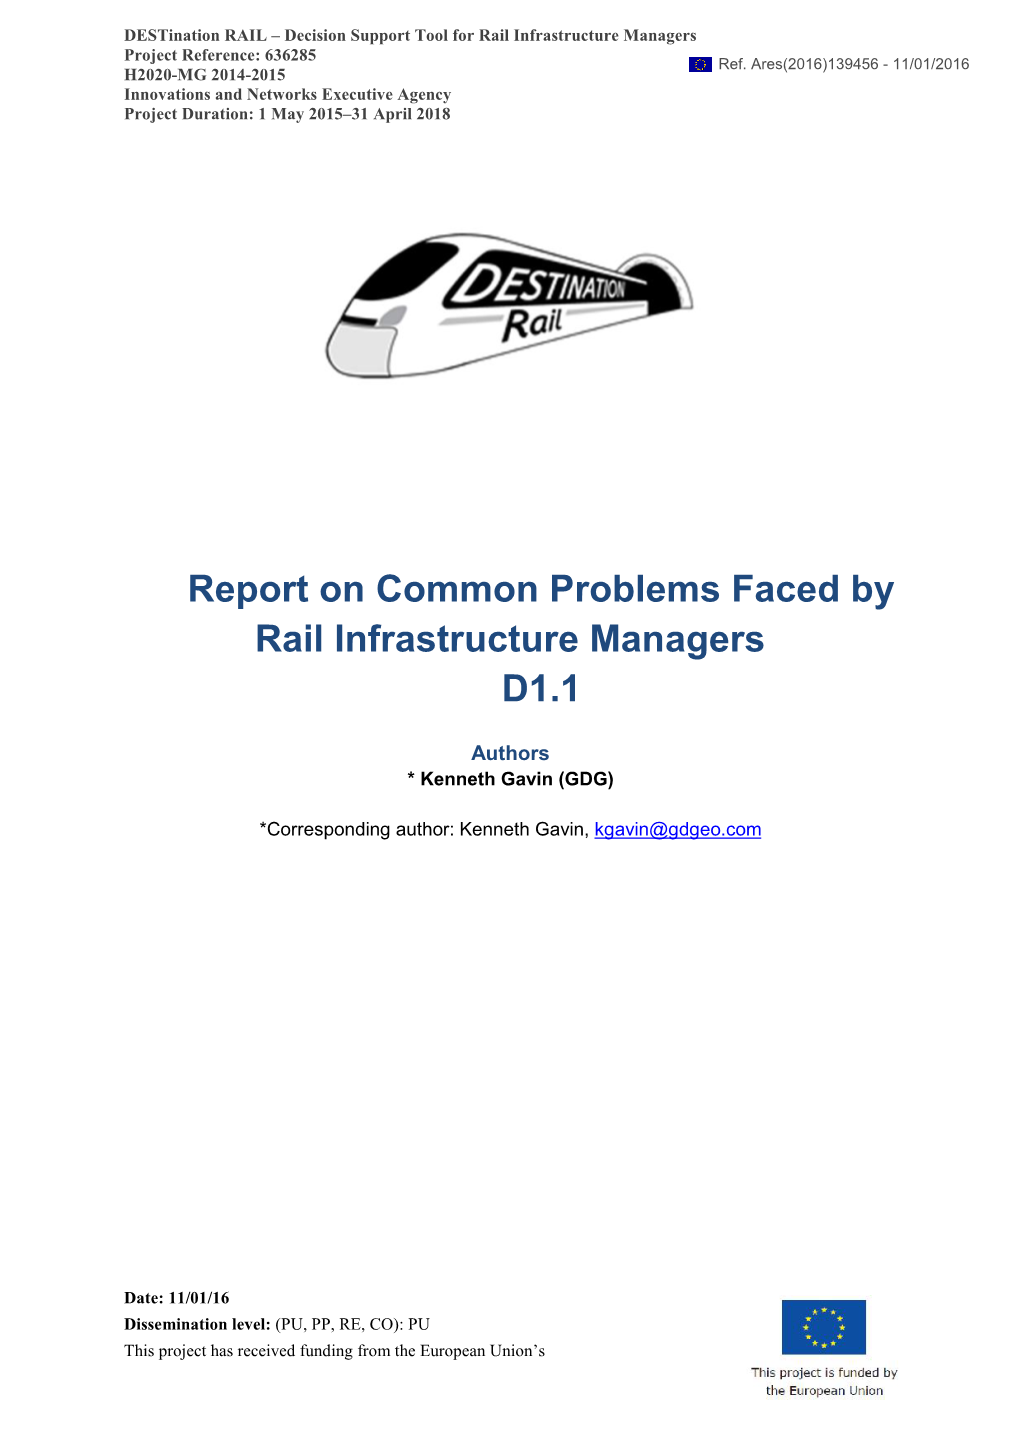 Report on Common Problems Faced by Rail Infrastructure Managers D1.1